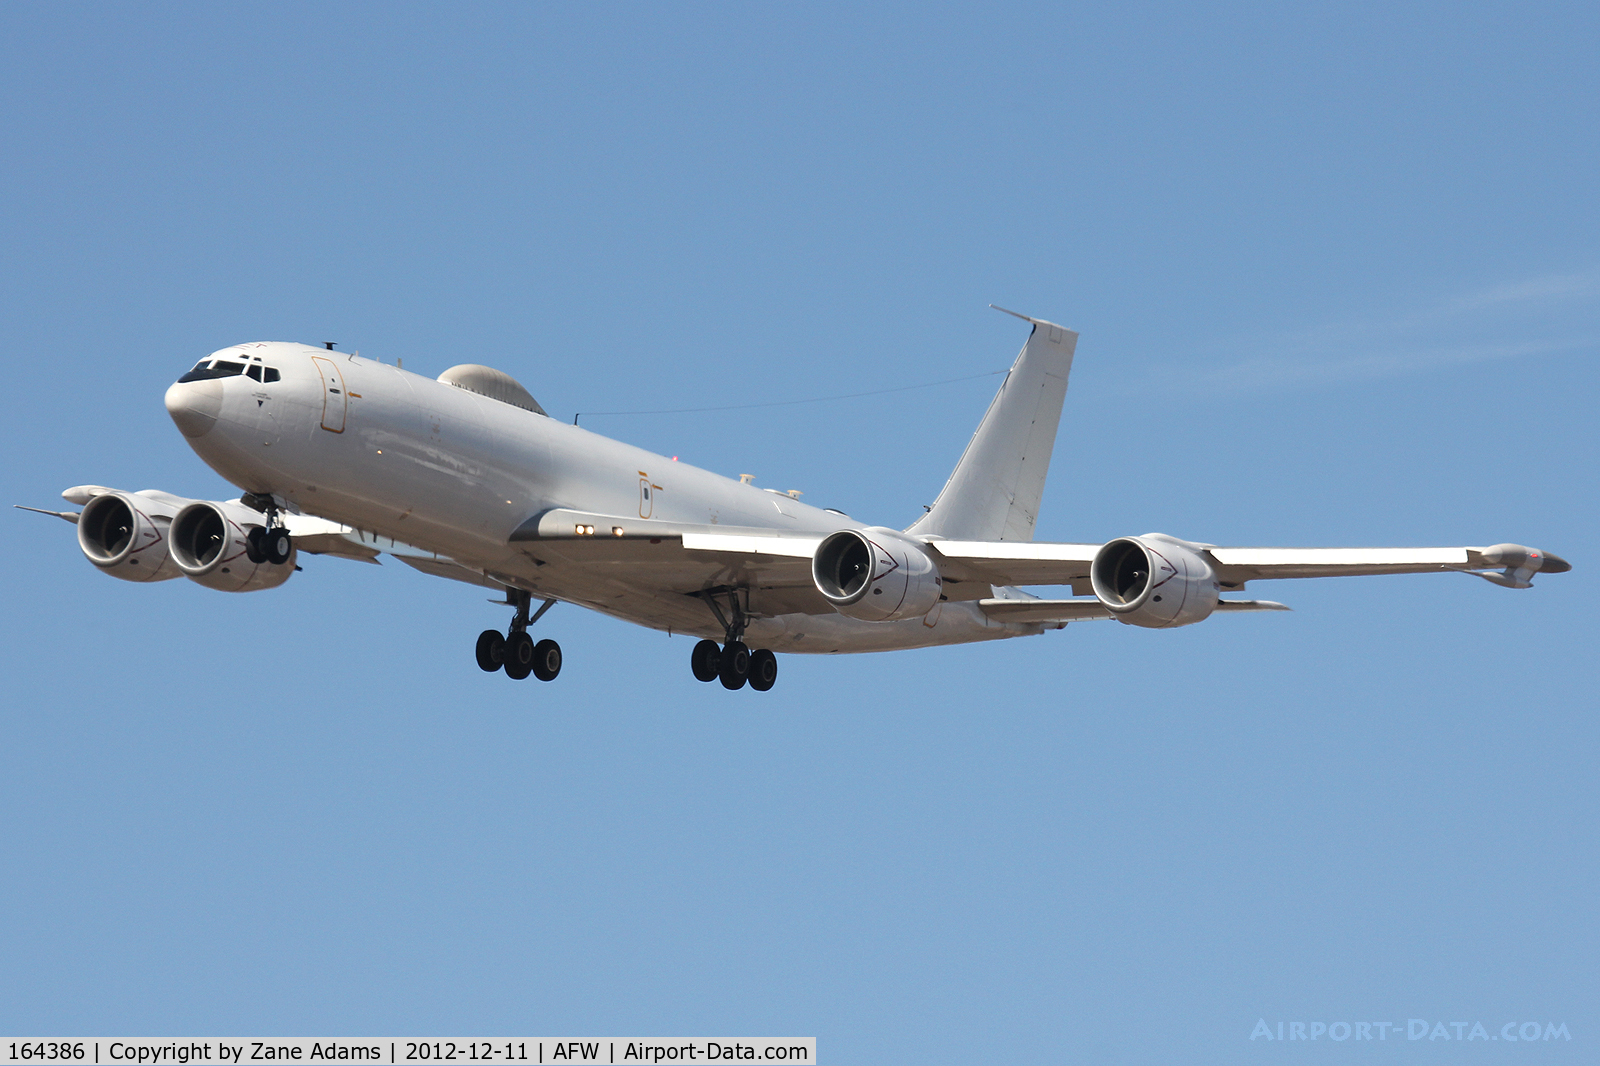 164386, 1989 Boeing E-6B Mercury C/N 23894, US Navy E-6B doing touch and goes at Alliance Airport - Fort Worth, TX